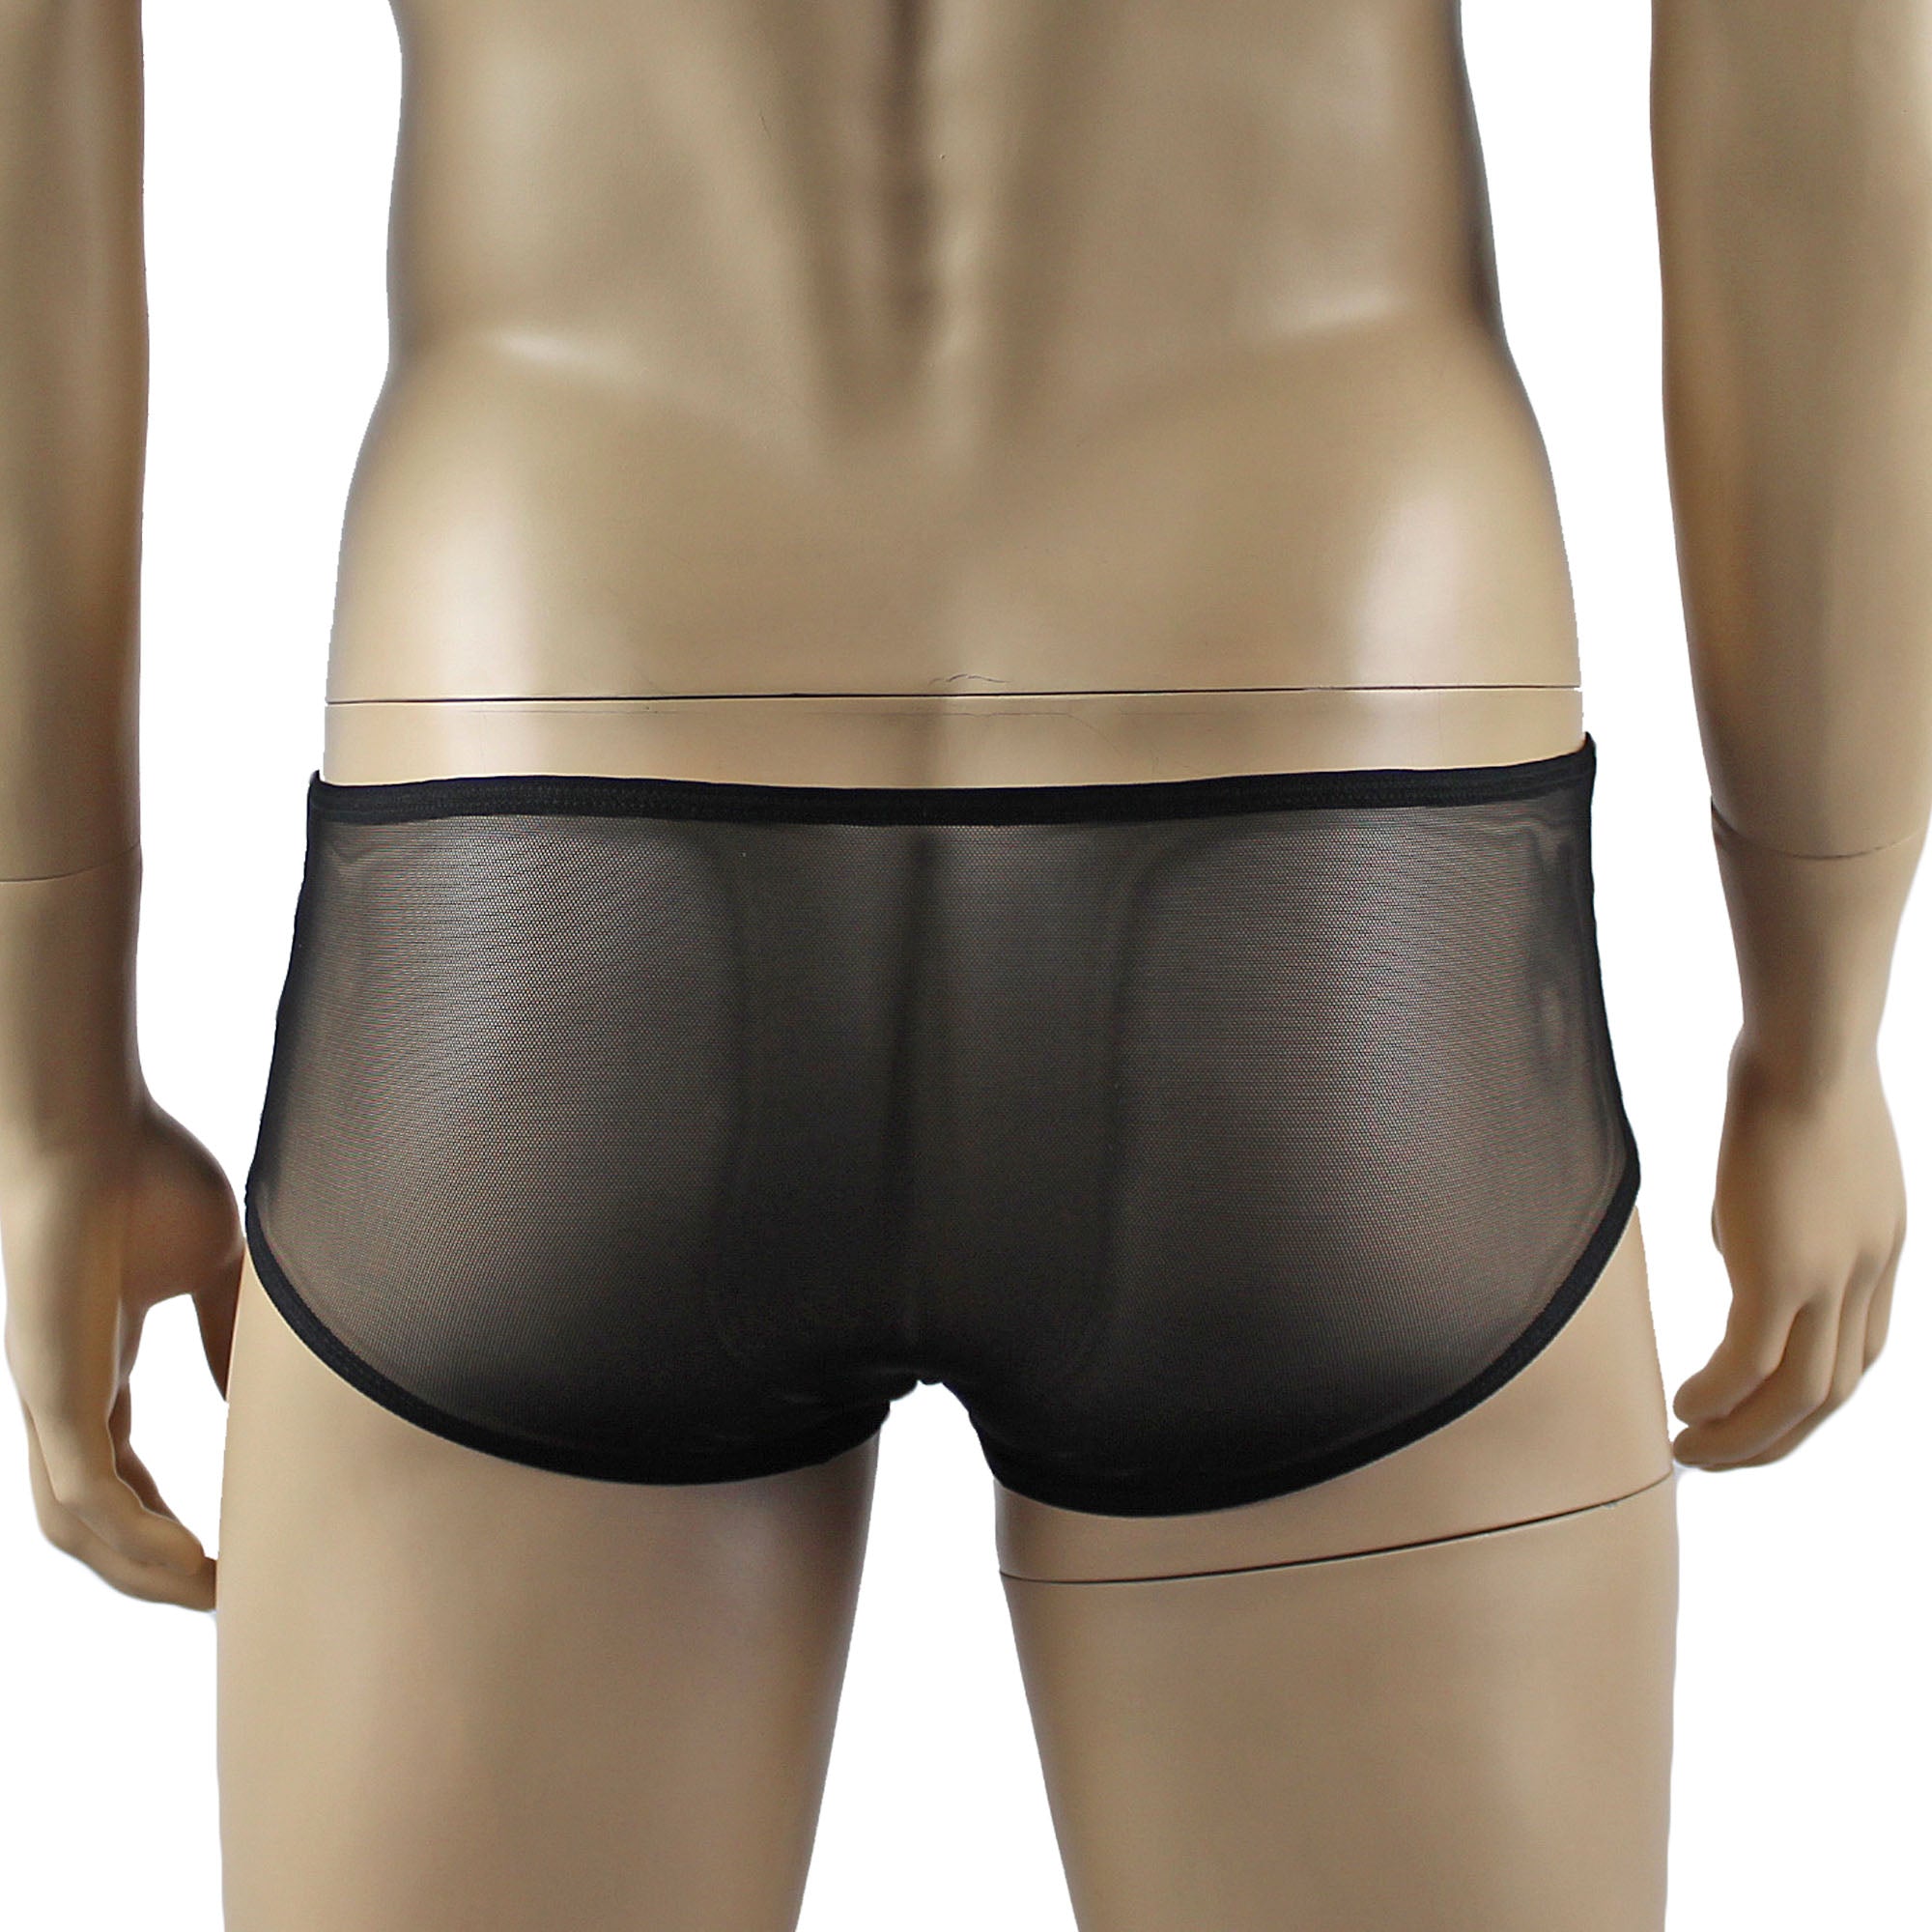 Mens Kristy Lingerie Sexy Lace and Mesh Panty Brief Black